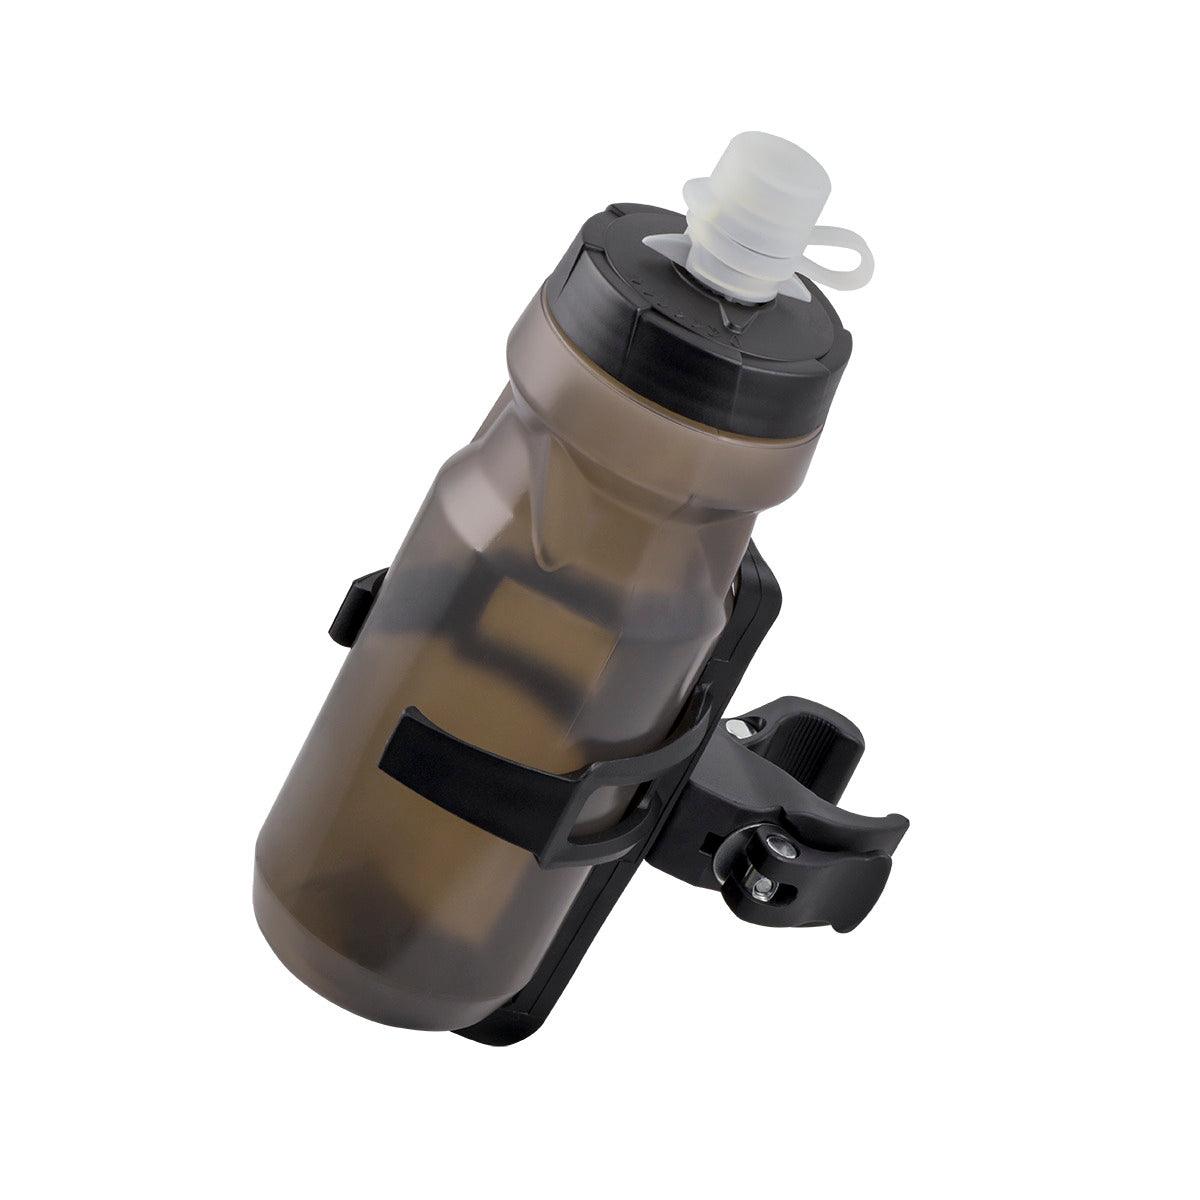 Xiaomi Water Bottle Holder for MI E-Scooters - Black | T-10A (7485685956796)